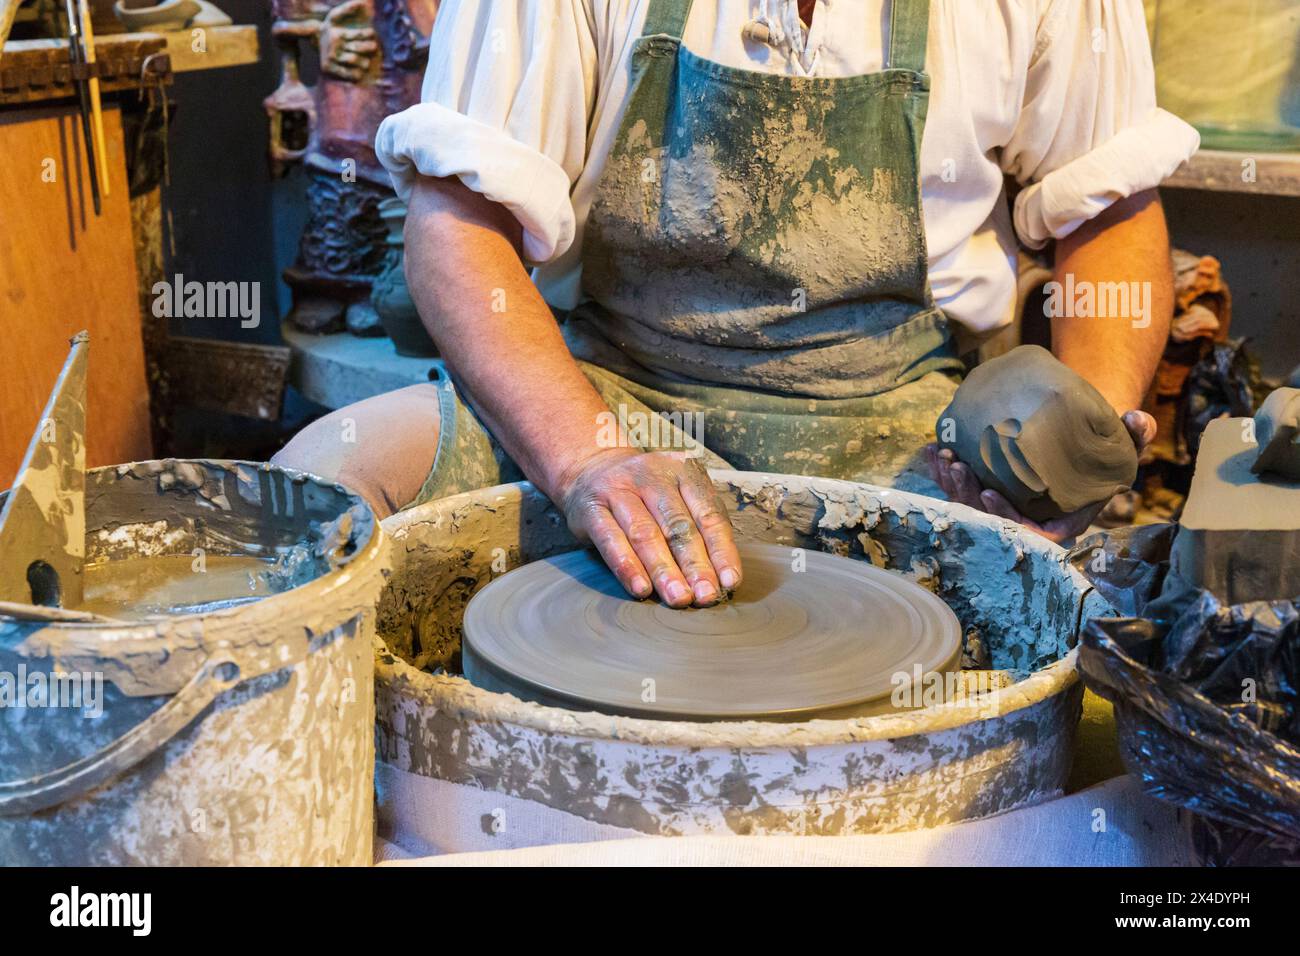 Romania, Transylvania, Maramures, Baie Mare. Casa Ola Rului. Traditional Romanian clay pottery exhibit. Potter and his wheel. (Editorial Use Only) Stock Photo